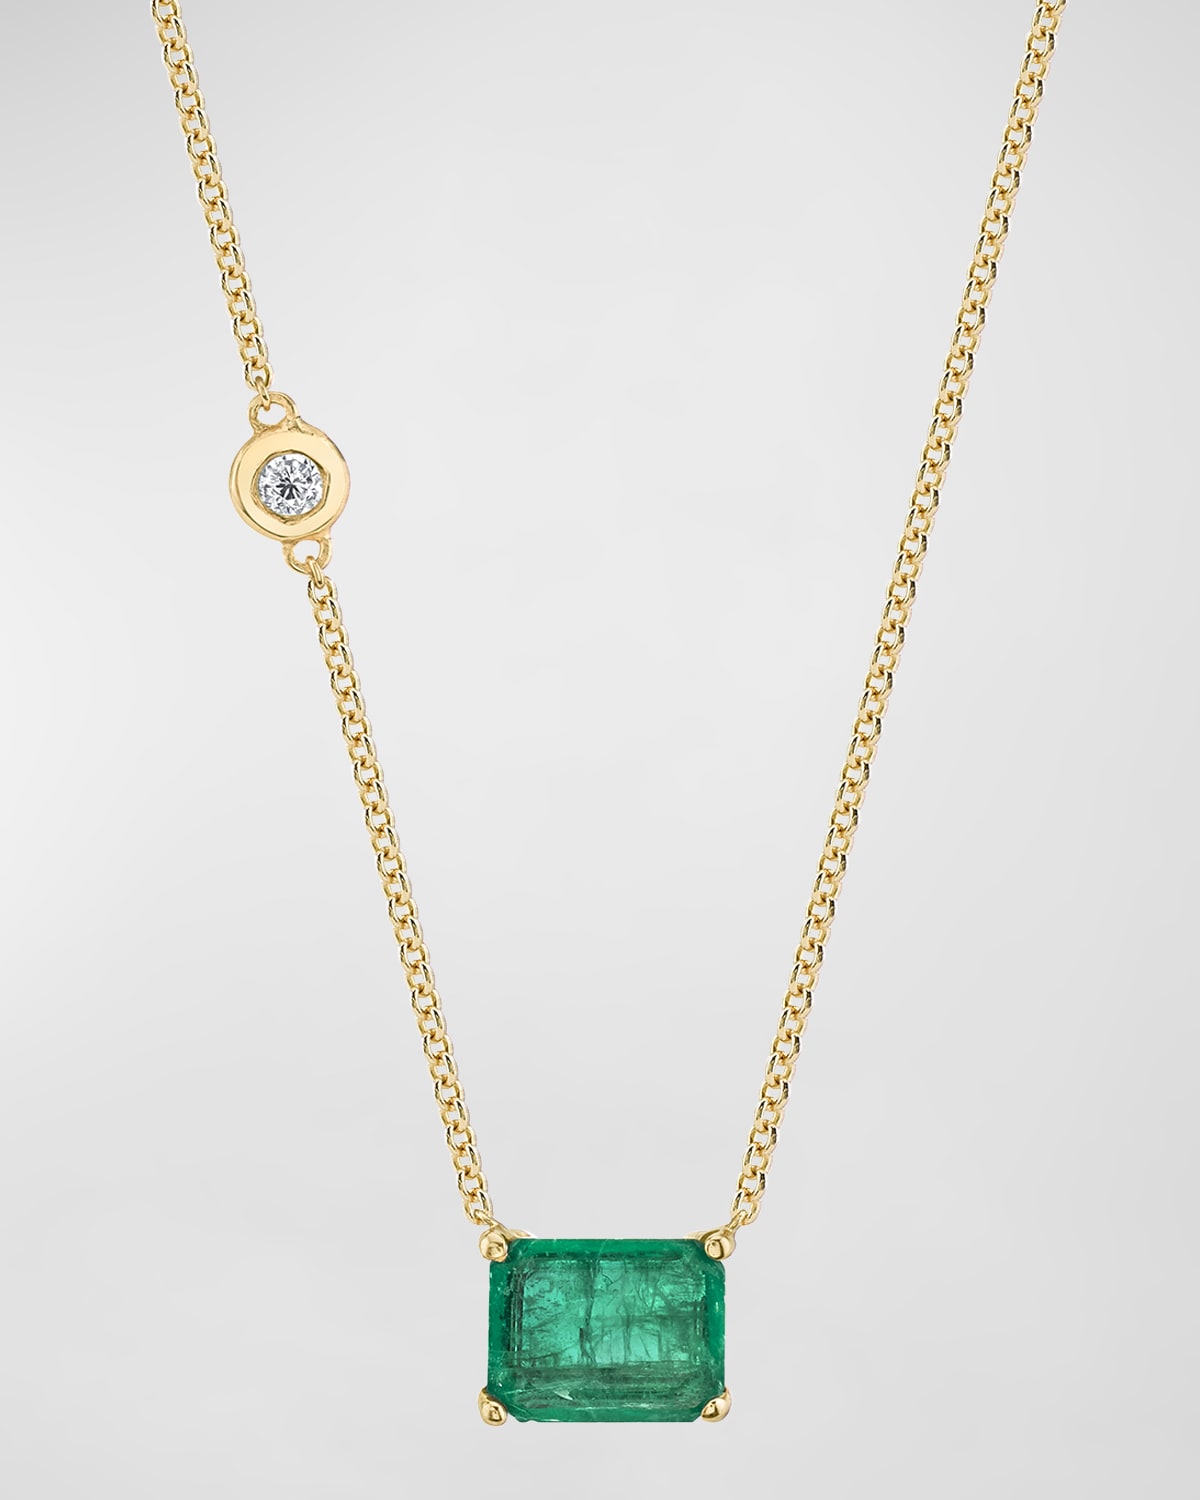 18K Yellow Gold Emerald Pendant Necklace with One Diamond